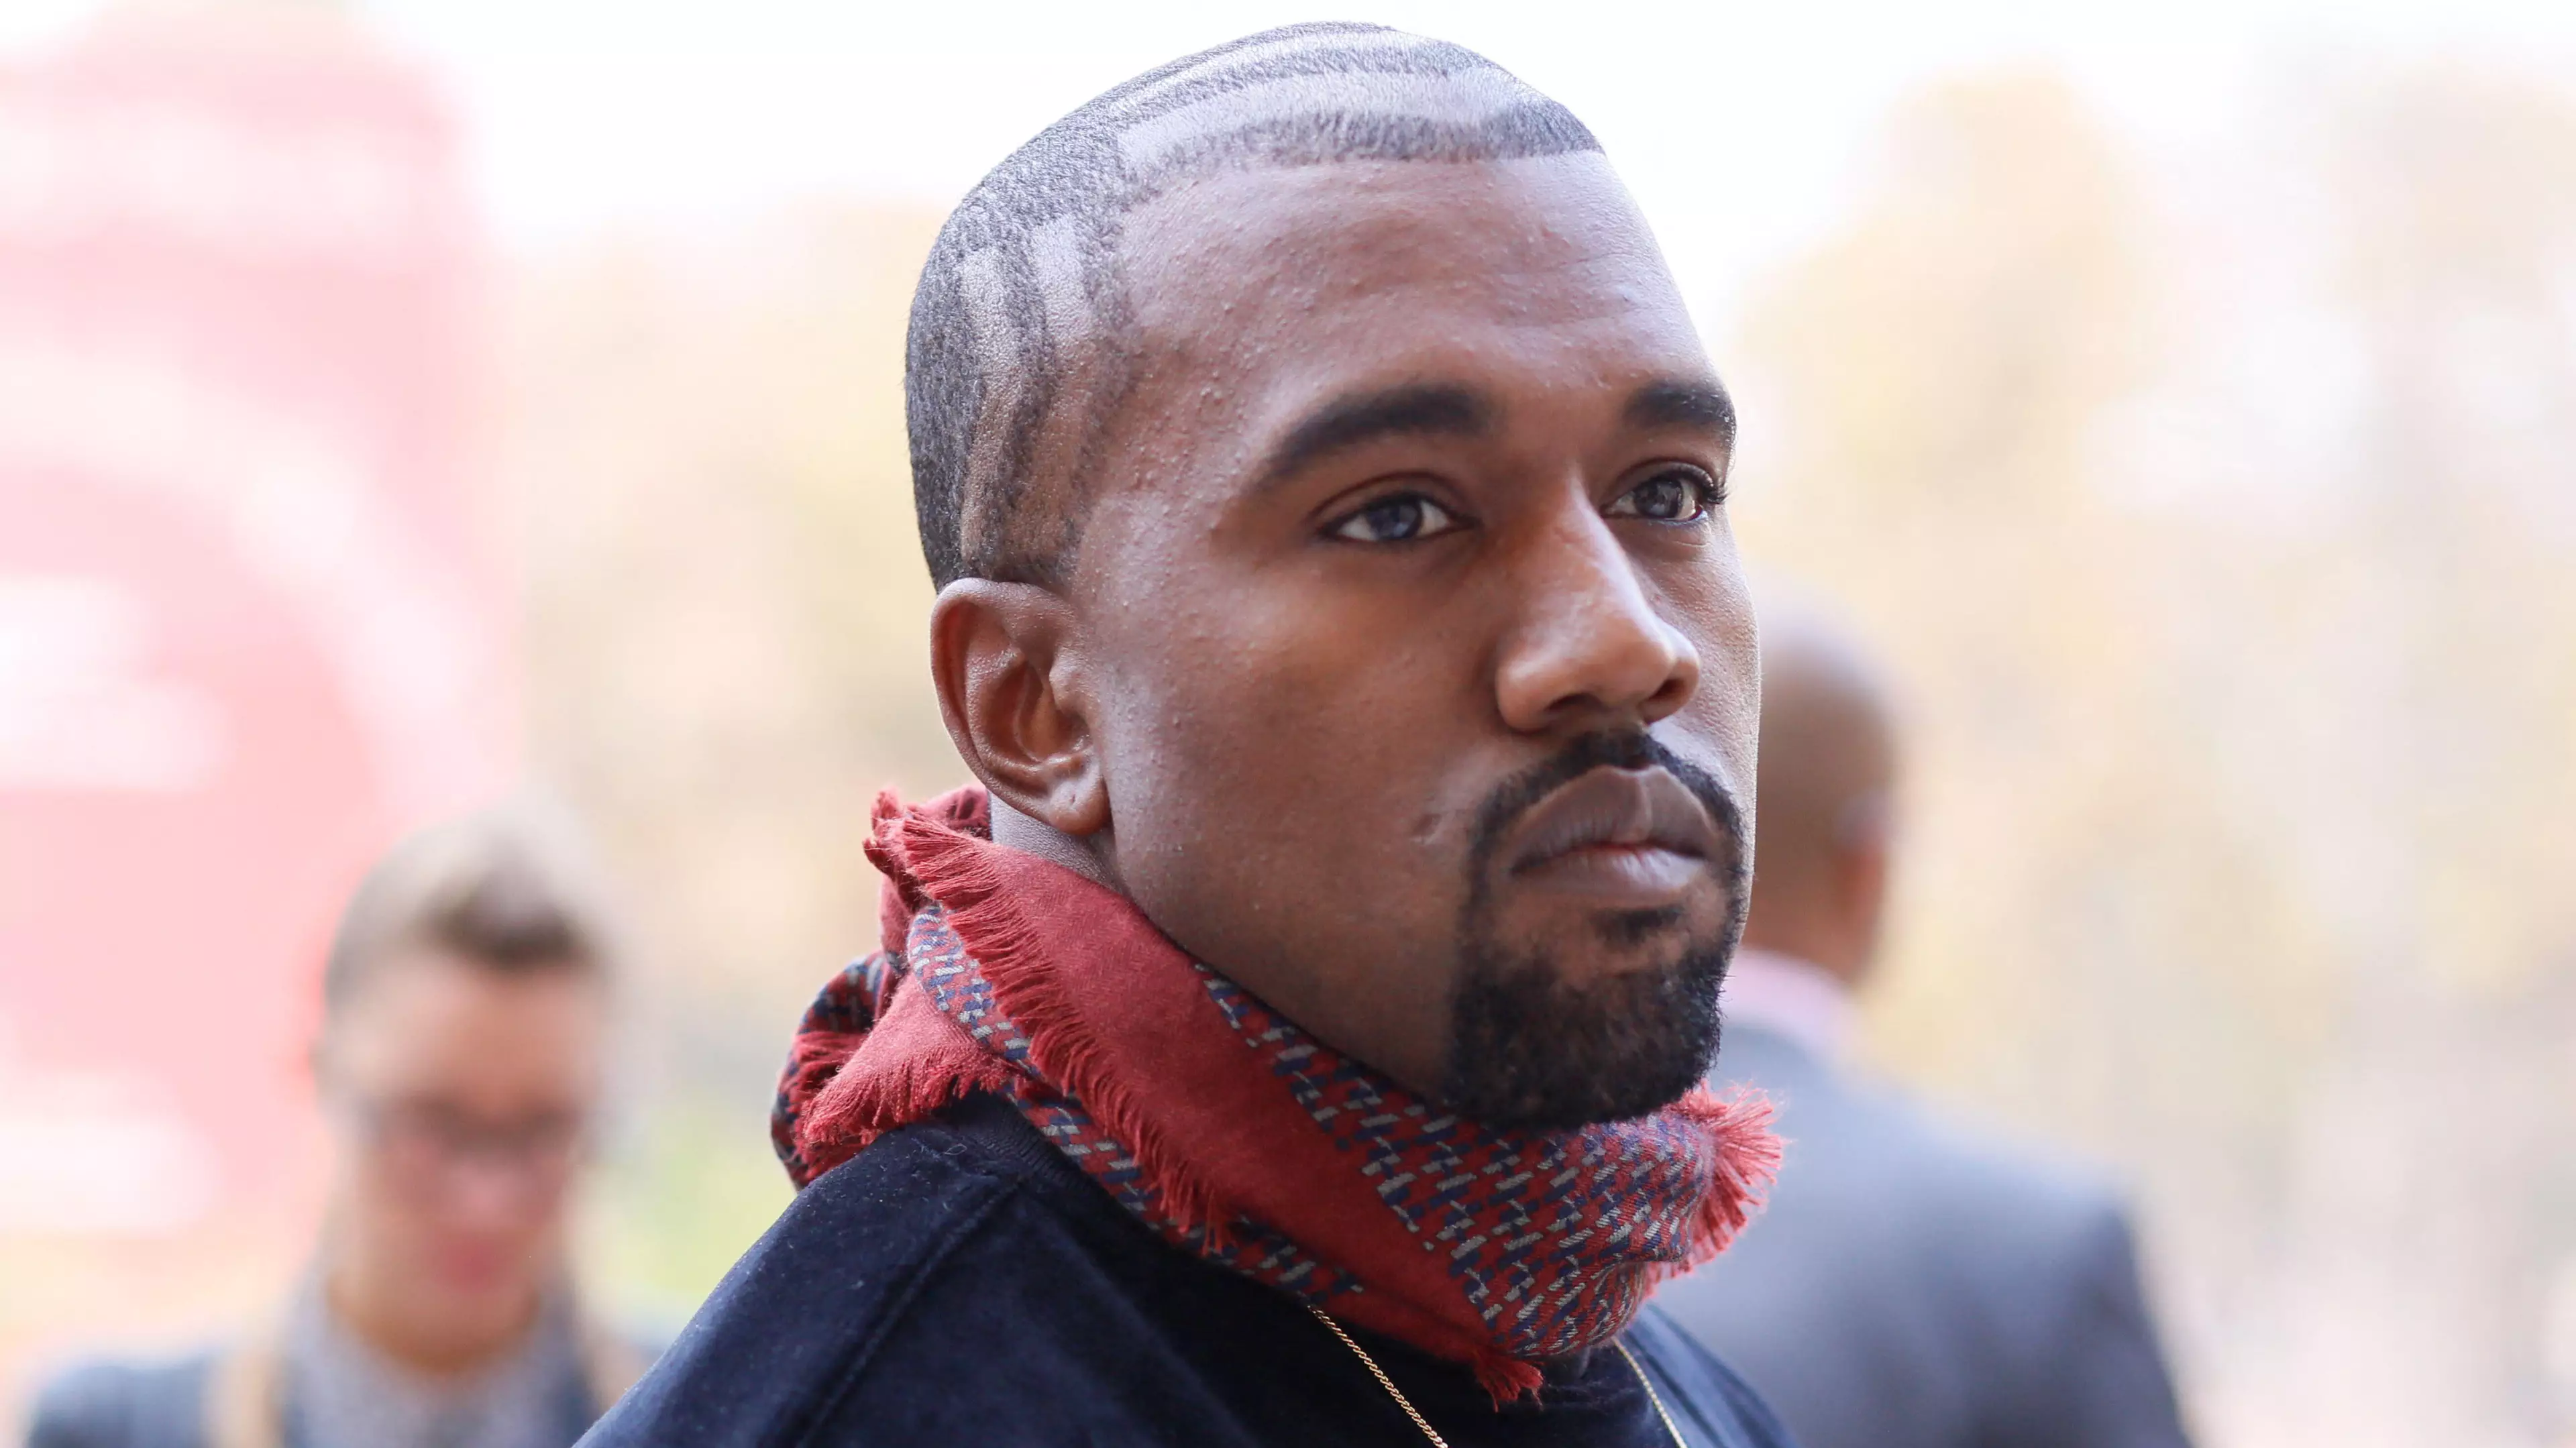 Judge Approves Kanye West's Application To Change His Legal Name